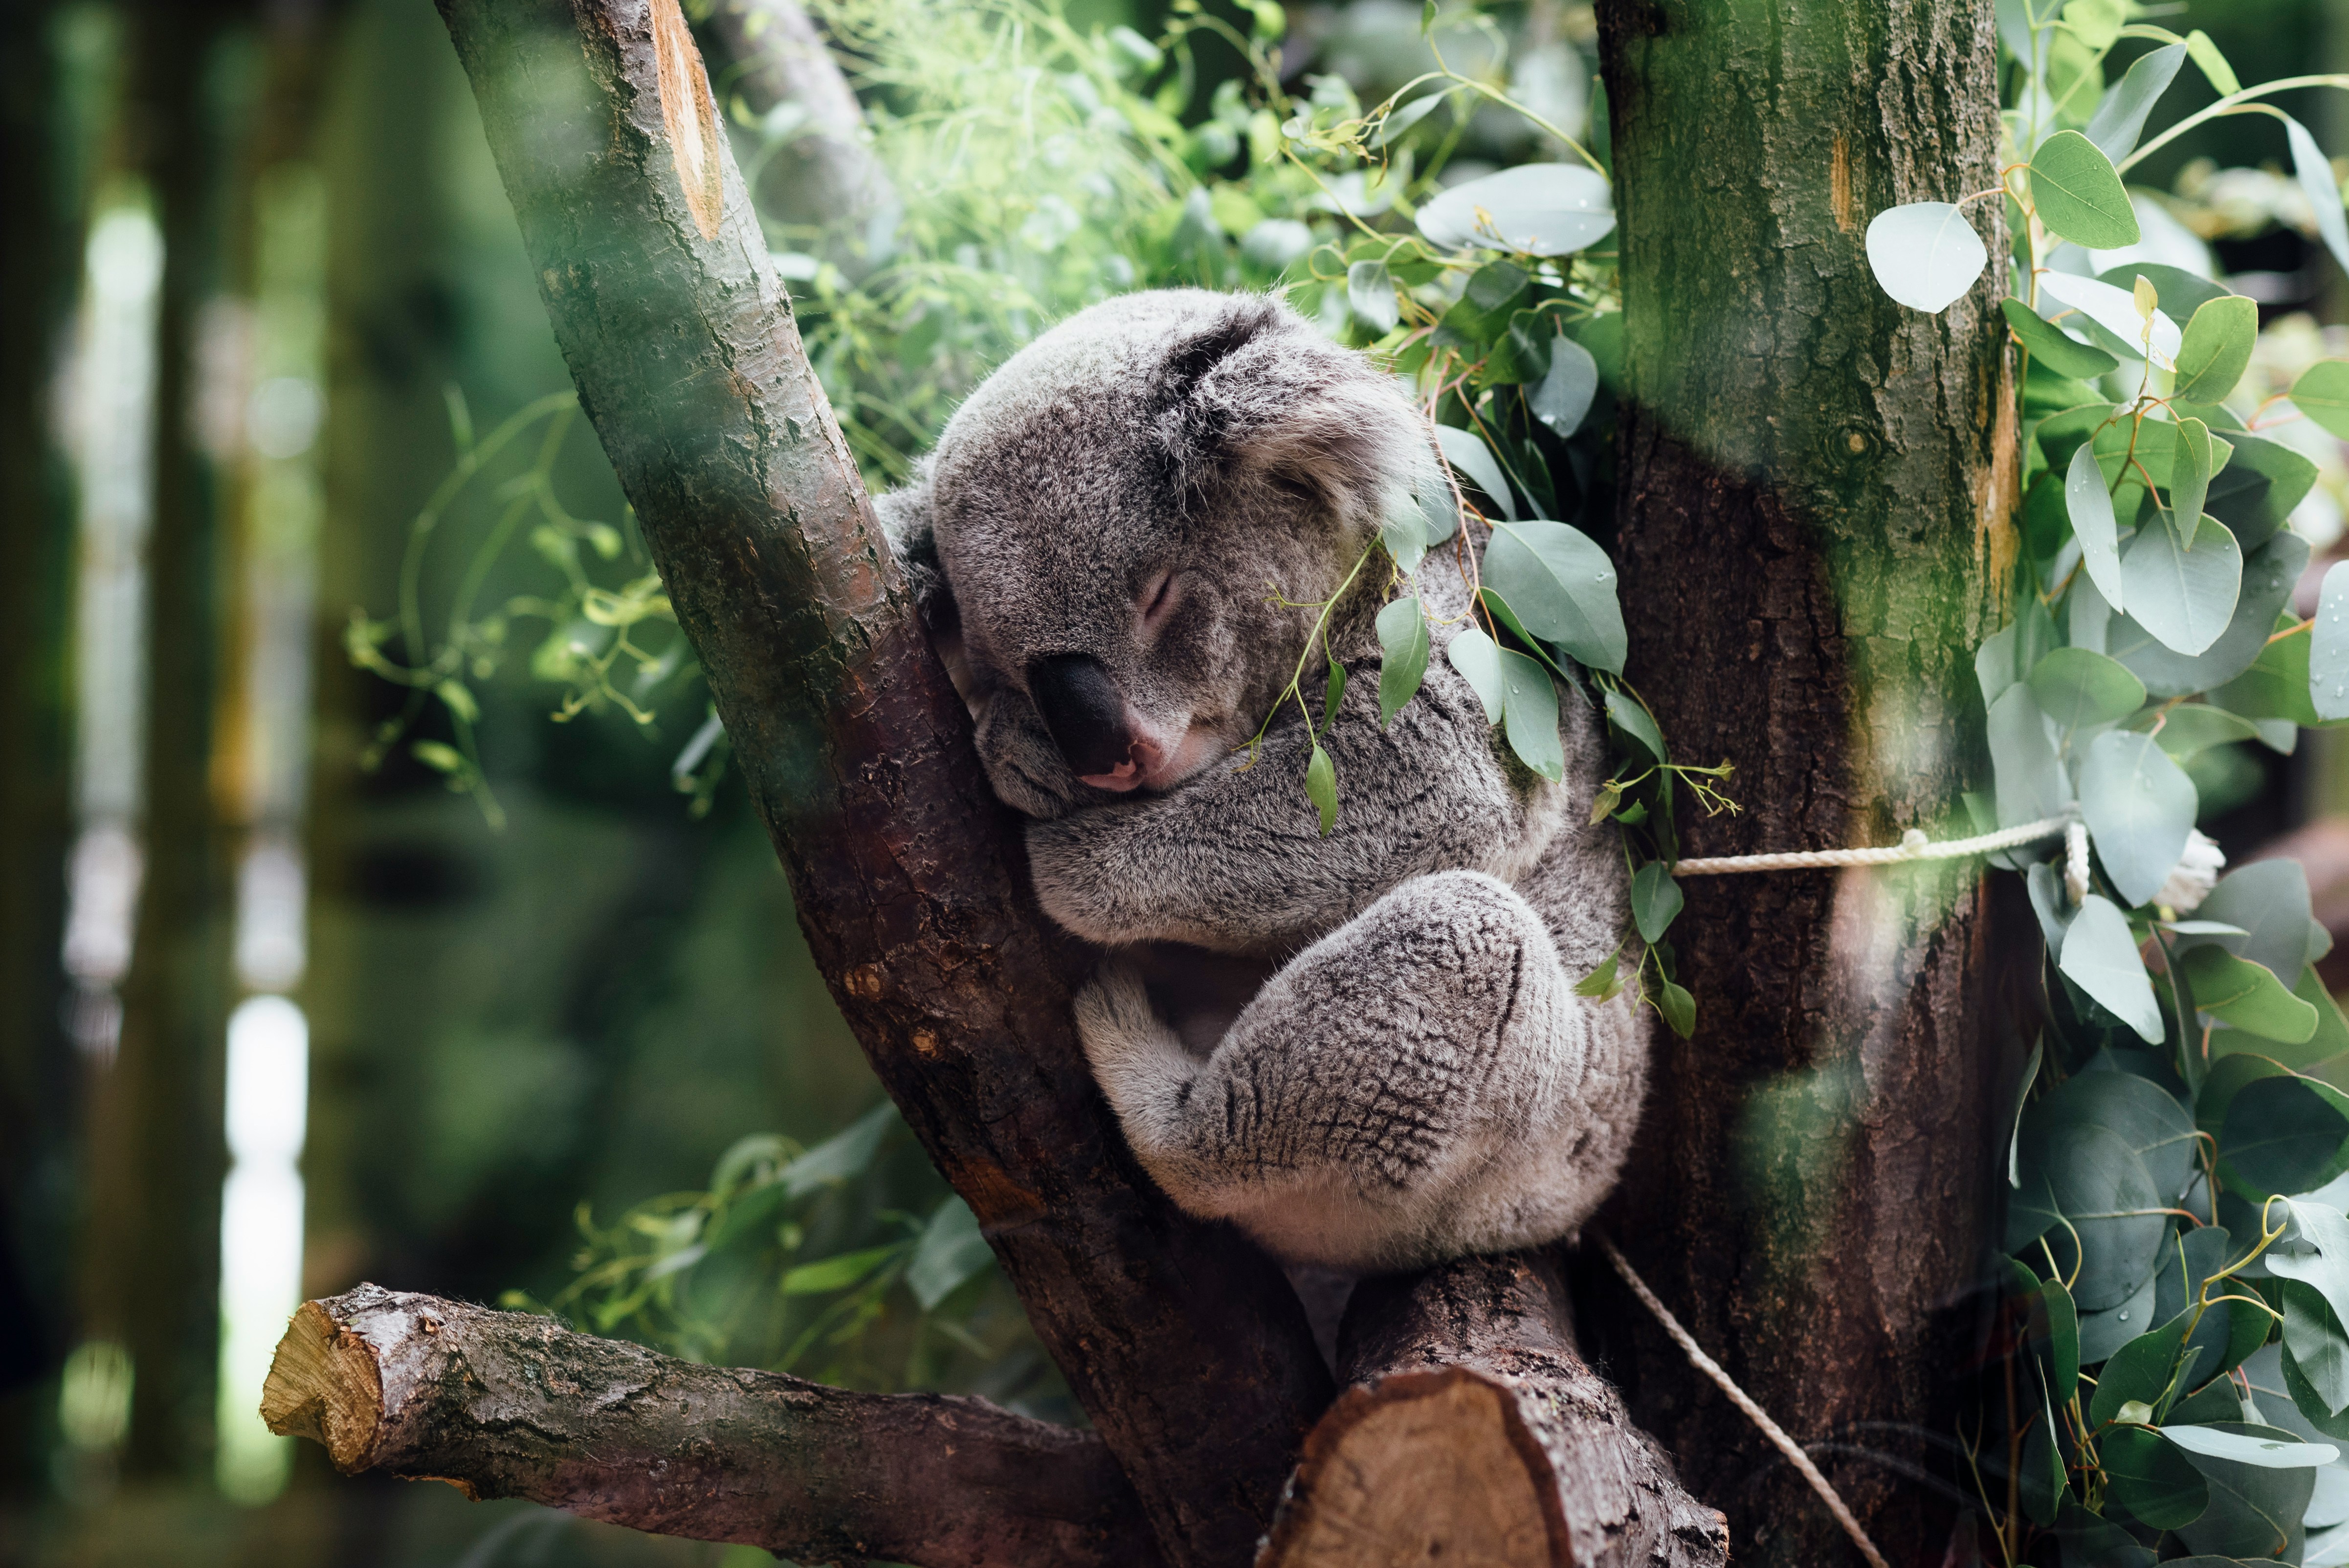 The homes of threatened native species, including koalas, continue to be destroyed. : Unsplash: Jordan Whitt Unsplash Licence